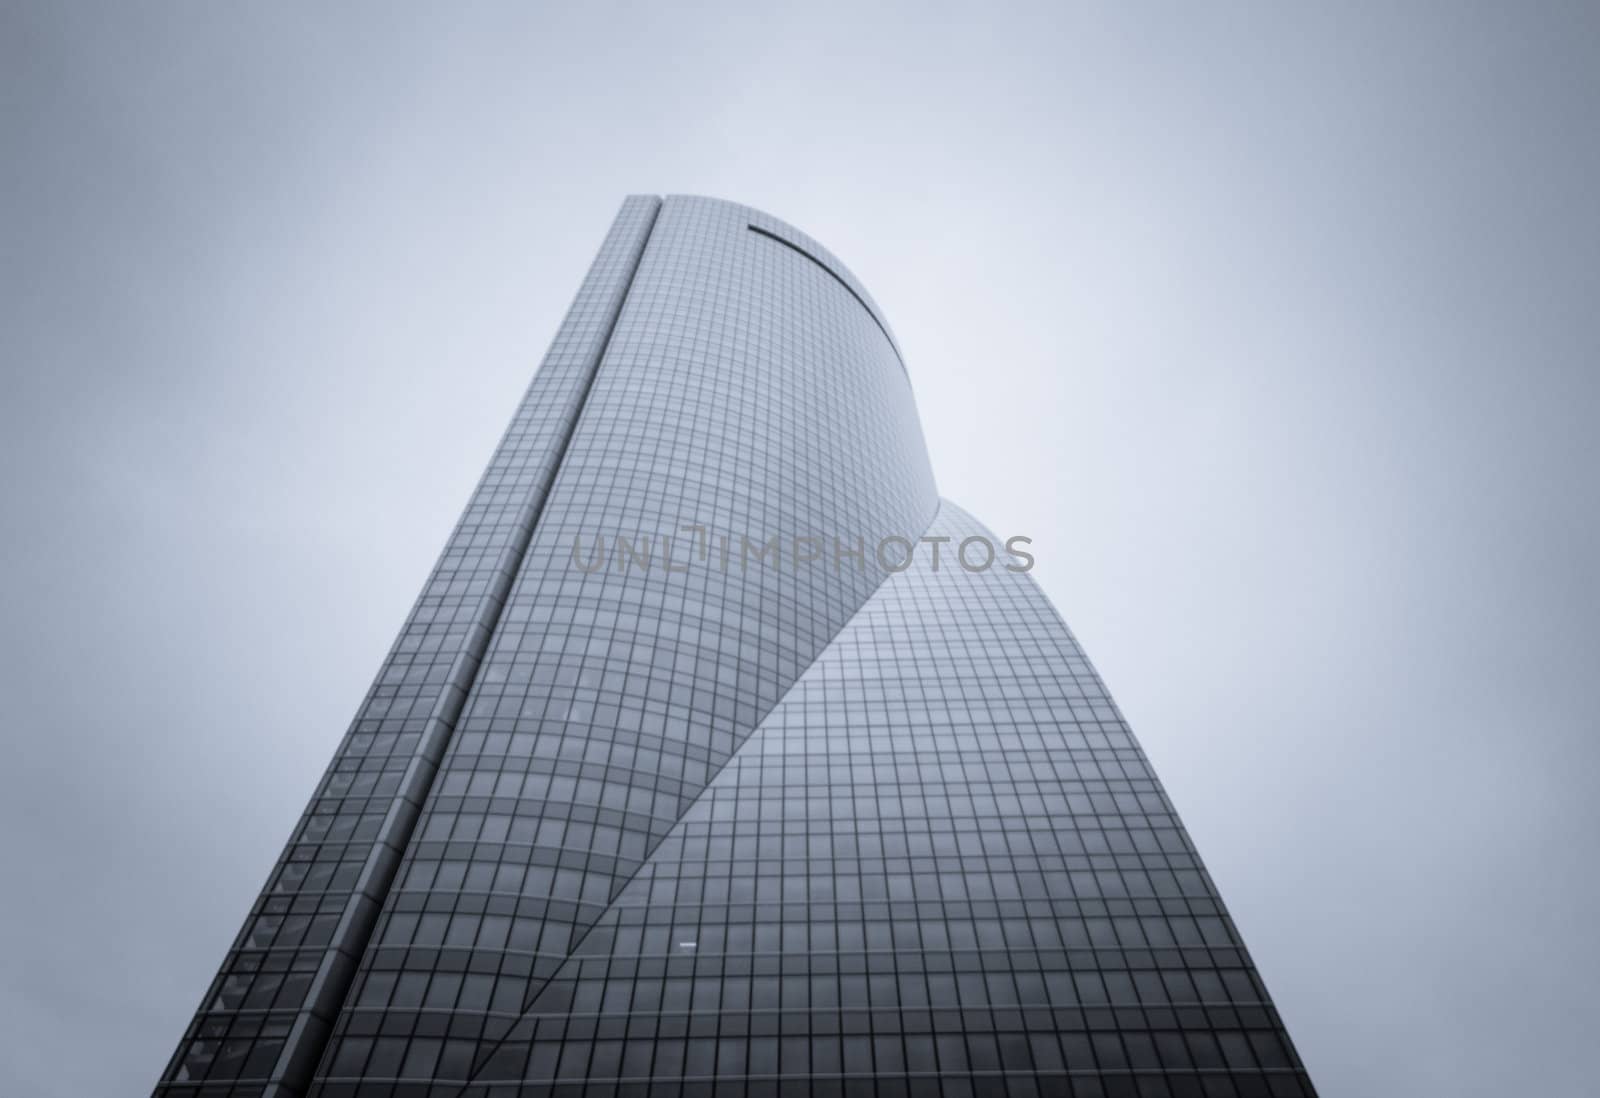 MADRID, SPAIN - MARCH 10 Cuatro Torres Business Area (CTBA), in Madrid, Spain, on March 10, 2013. The Space Tower skyscraper, was designed by American architect Henry N. Cobb and inaugurated in 2007